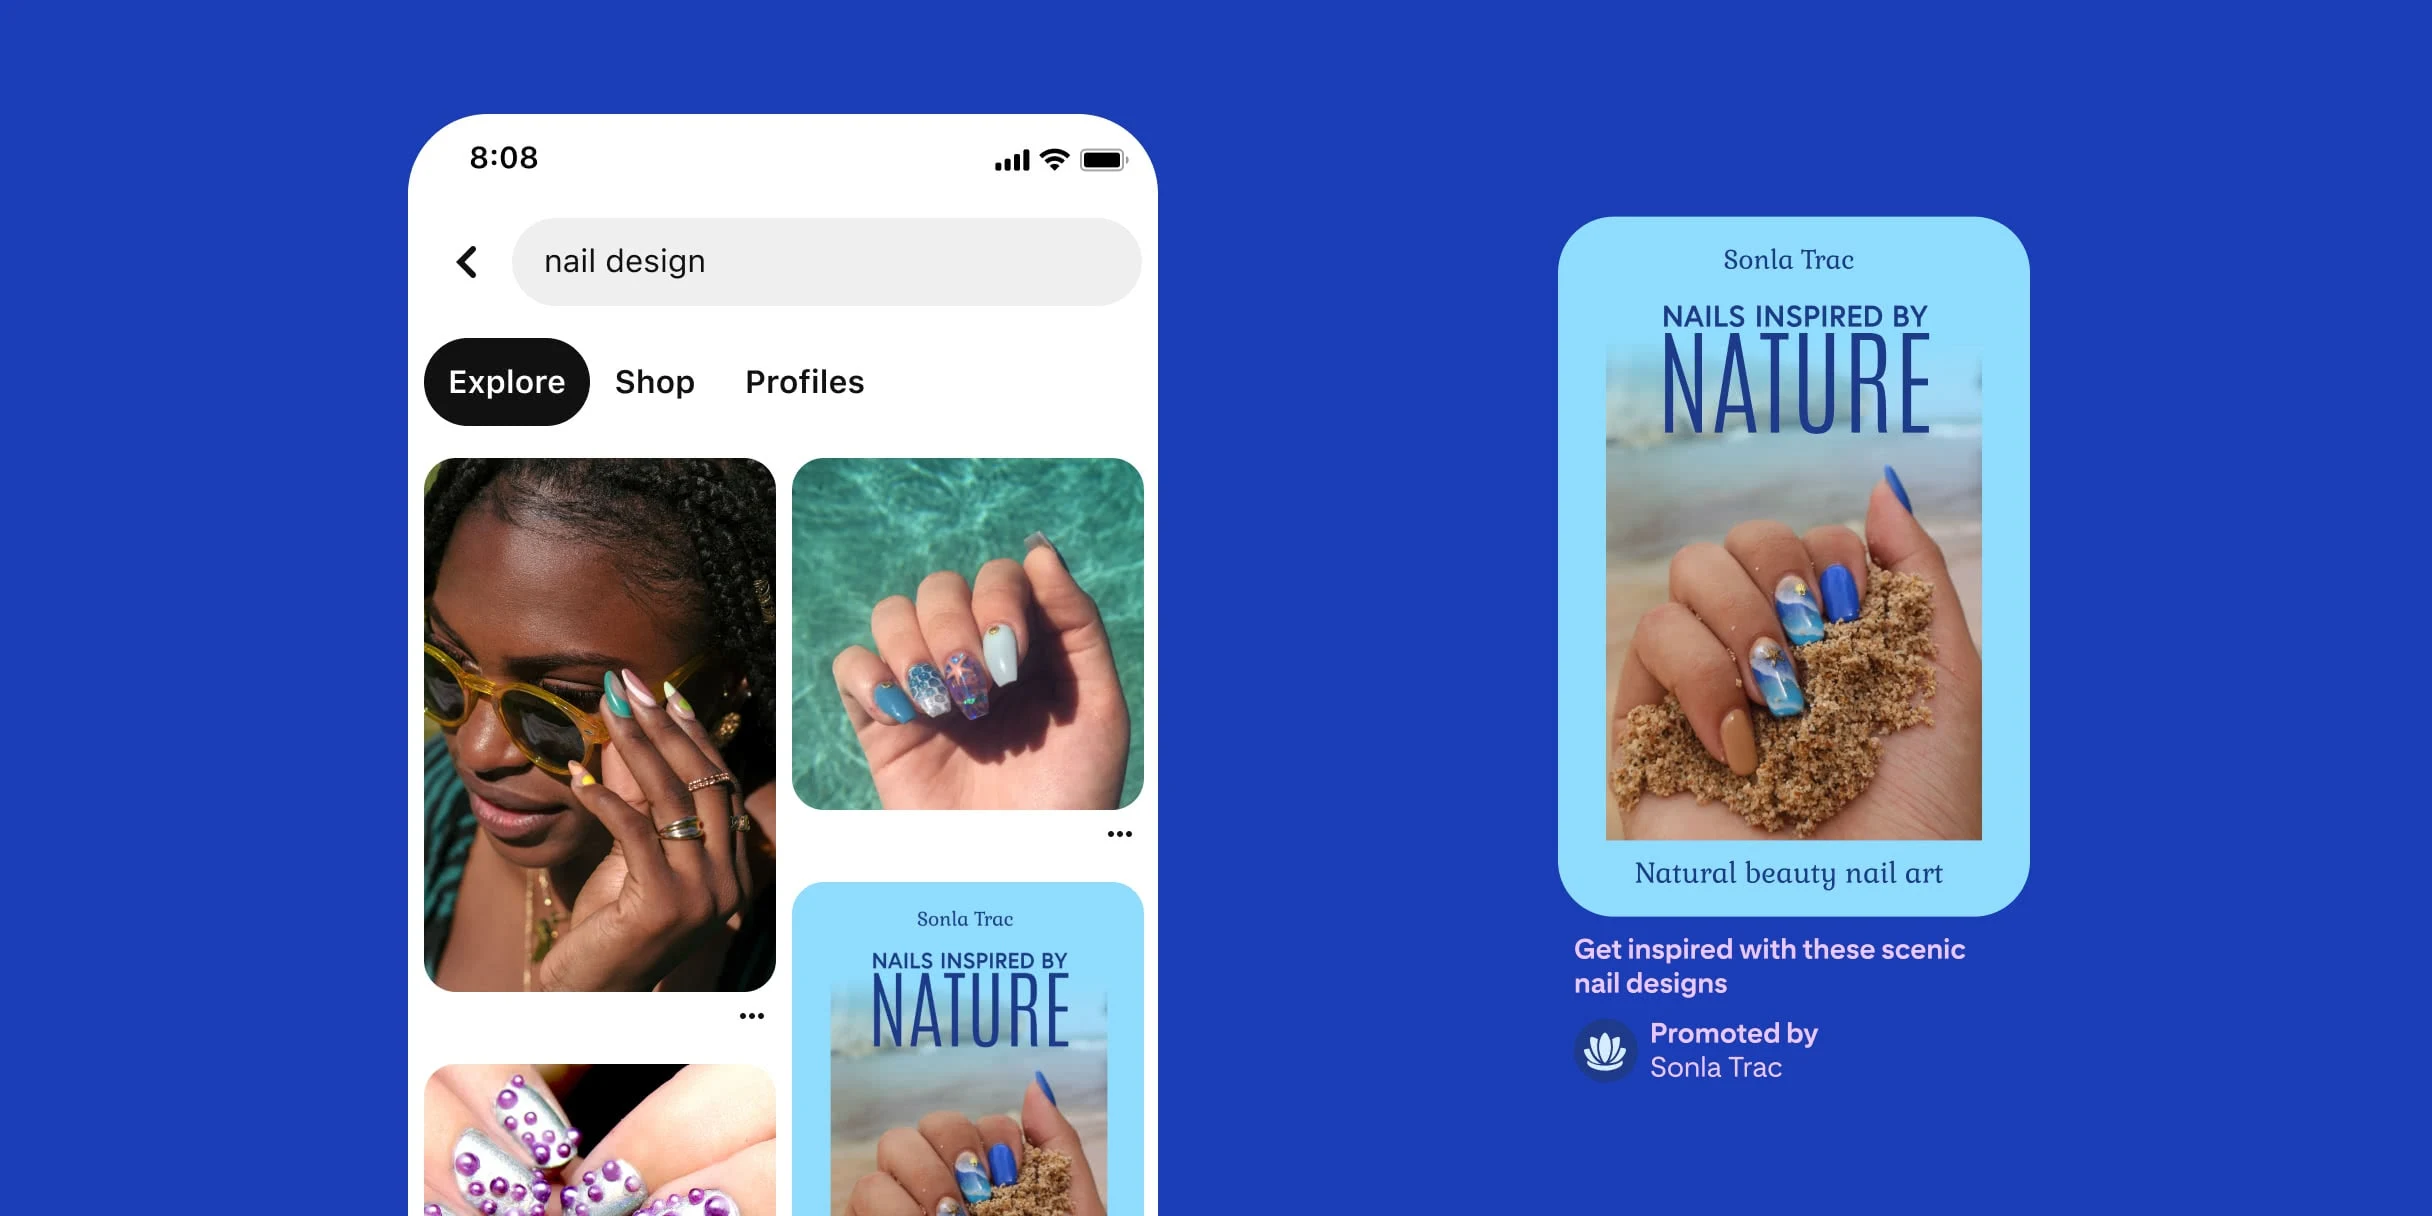 Pinterest search term for nail designs. Black woman holding the frame of her sunglasses, her long nails have pastel shapes on them. A hand with long nails and with sea inspired designs over a pool background. Hand with short nails with silver nail polish and purple 3D dots. Pin showcasing a hand on the beach holding sand. The hand has long nails with a beachy design. Text reads nails inspired by nature. Natural beauty nail art. Description reads get inspired by these scenic nail designs. 